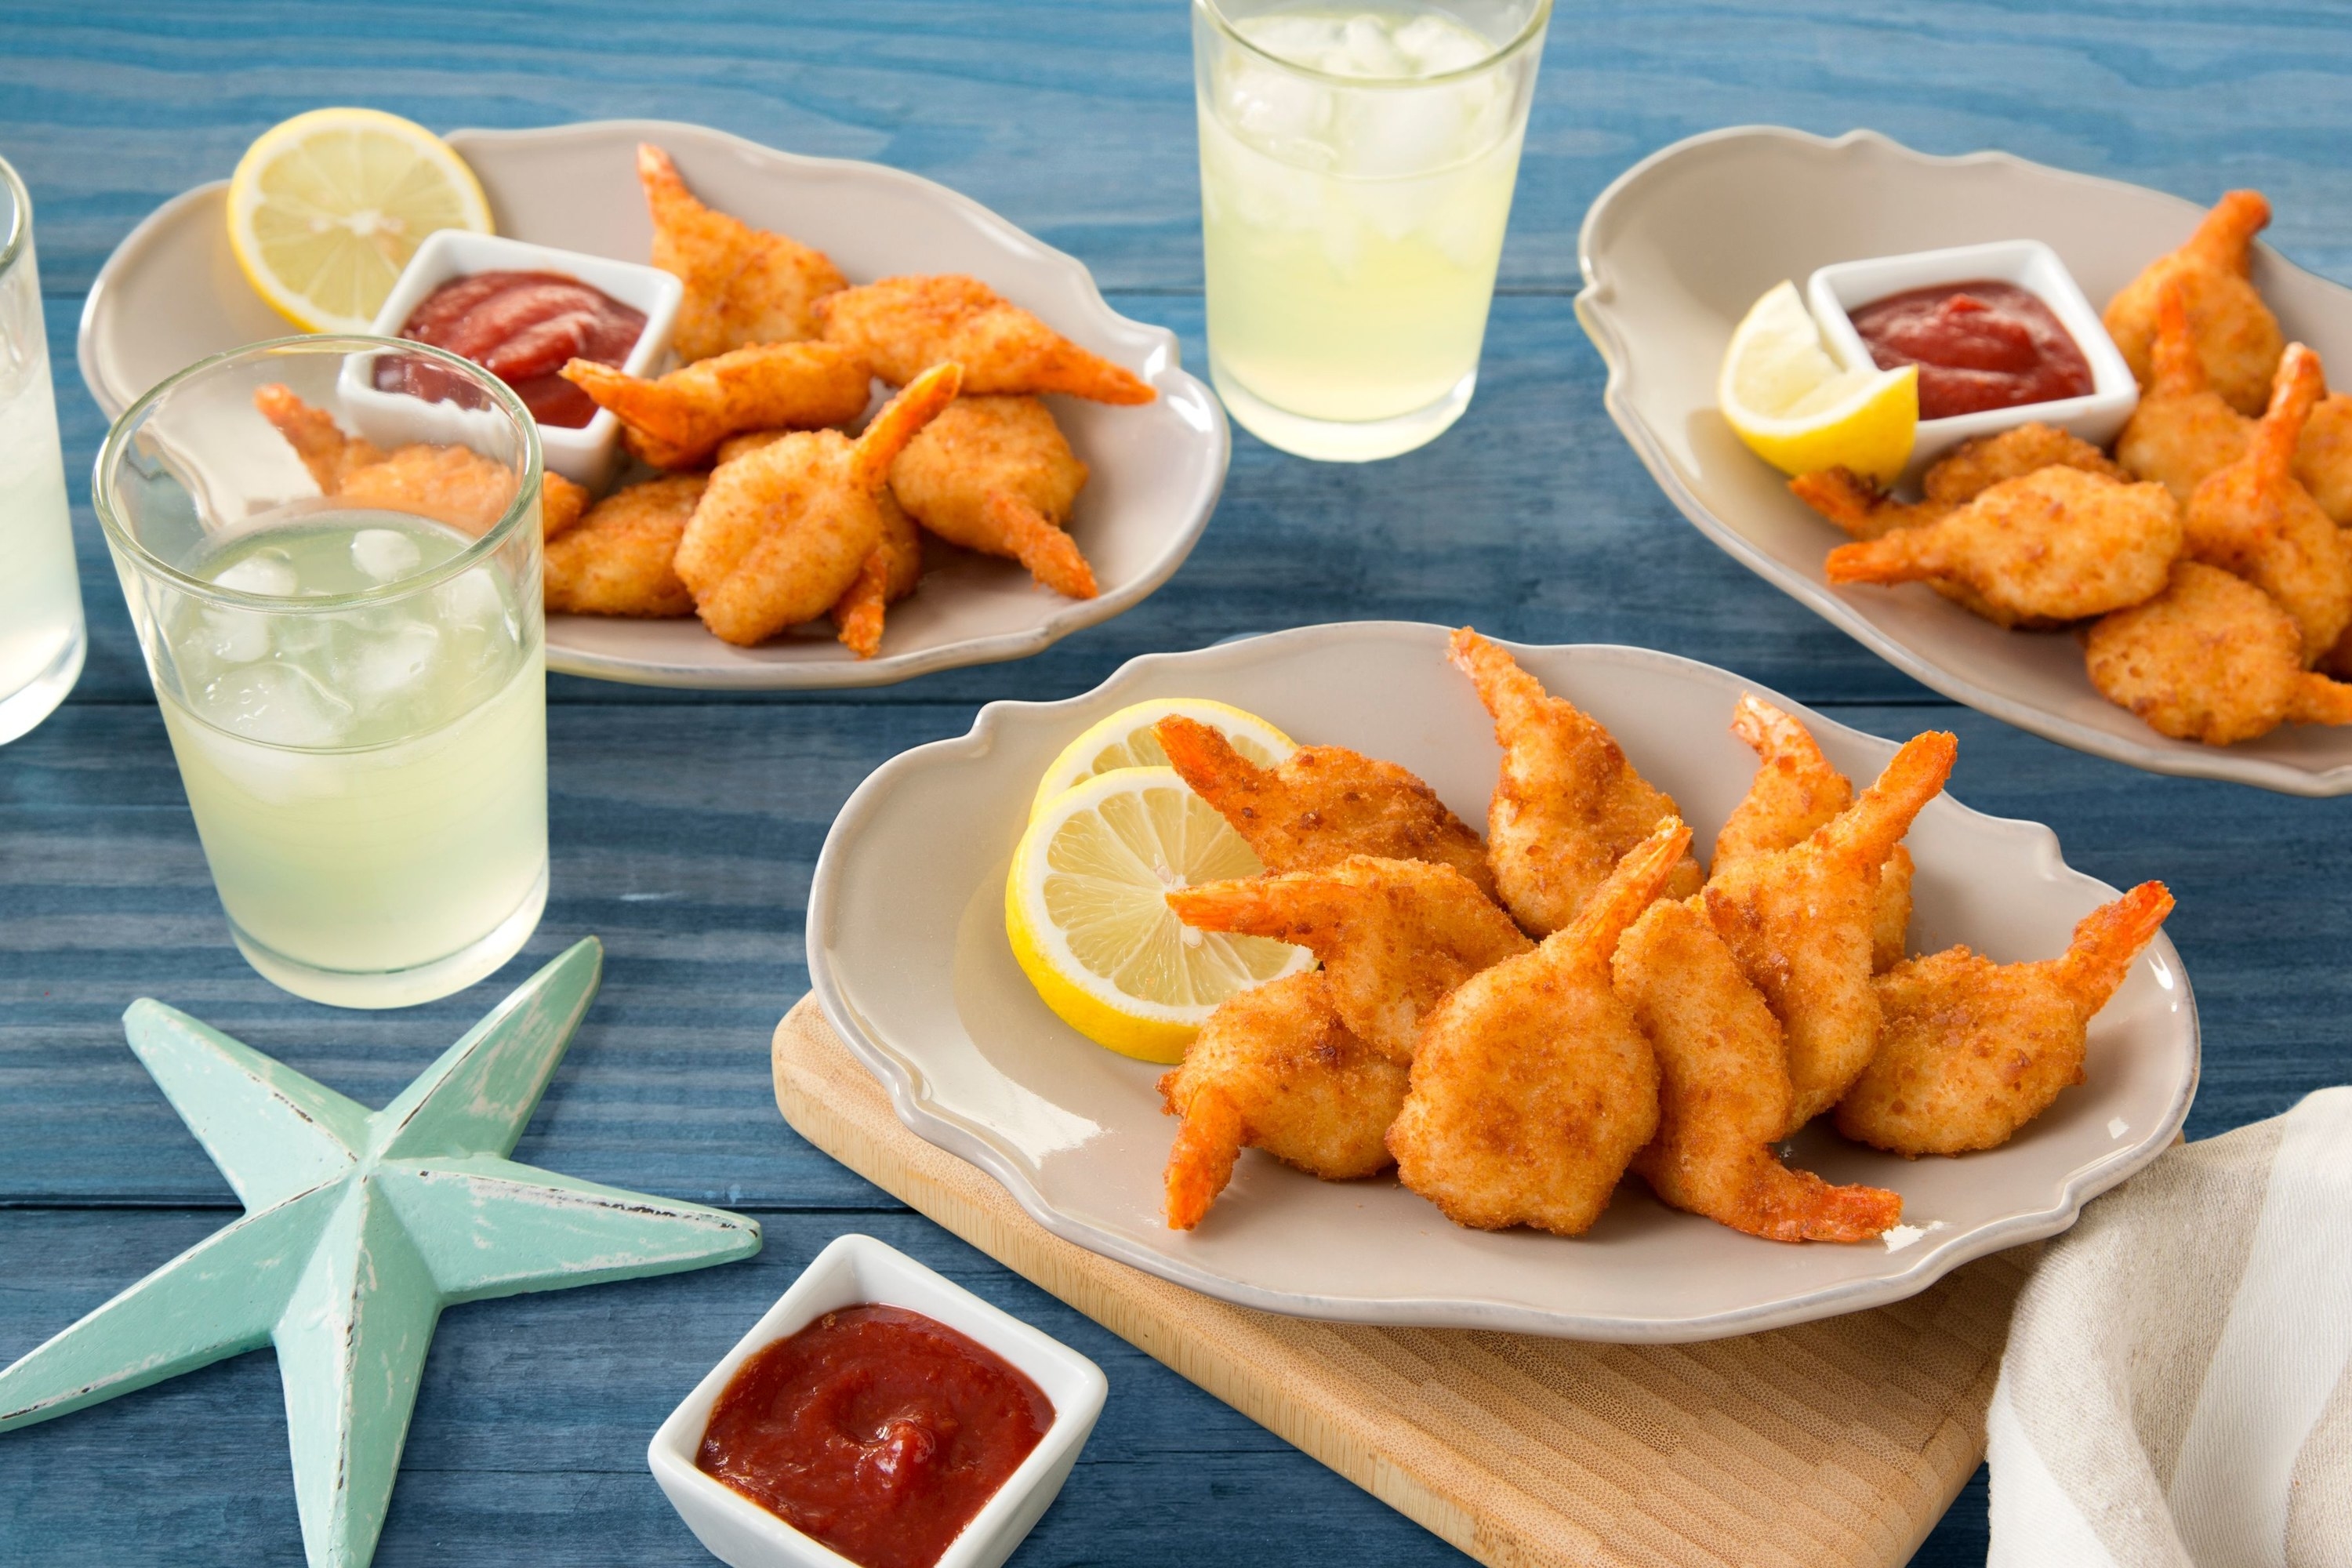 Plates of cooked, breaded shrimp